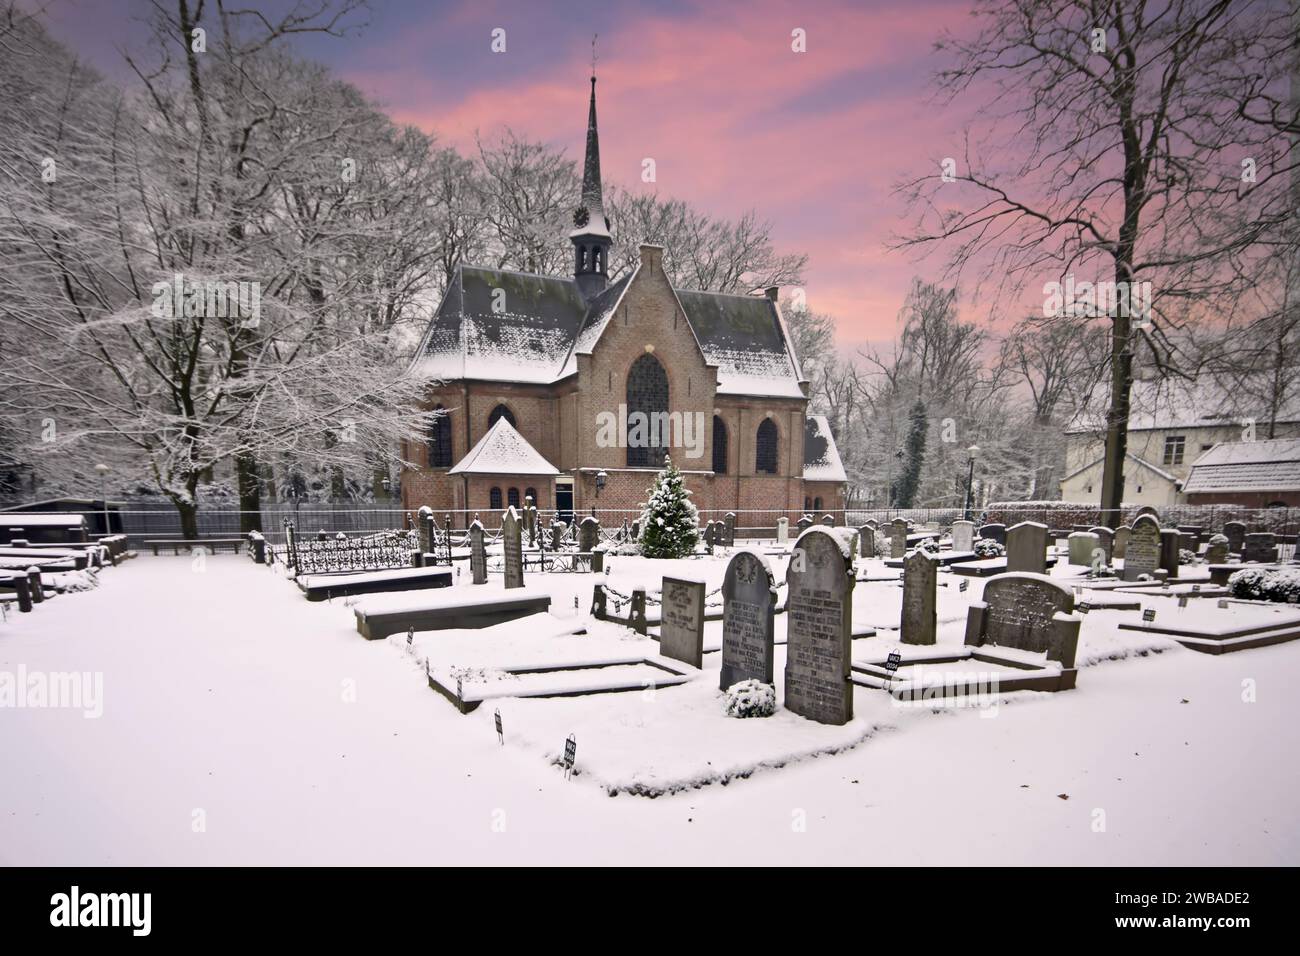 Little snowy church in Lage Vuursche in winter in the Netherlands Stock Photo